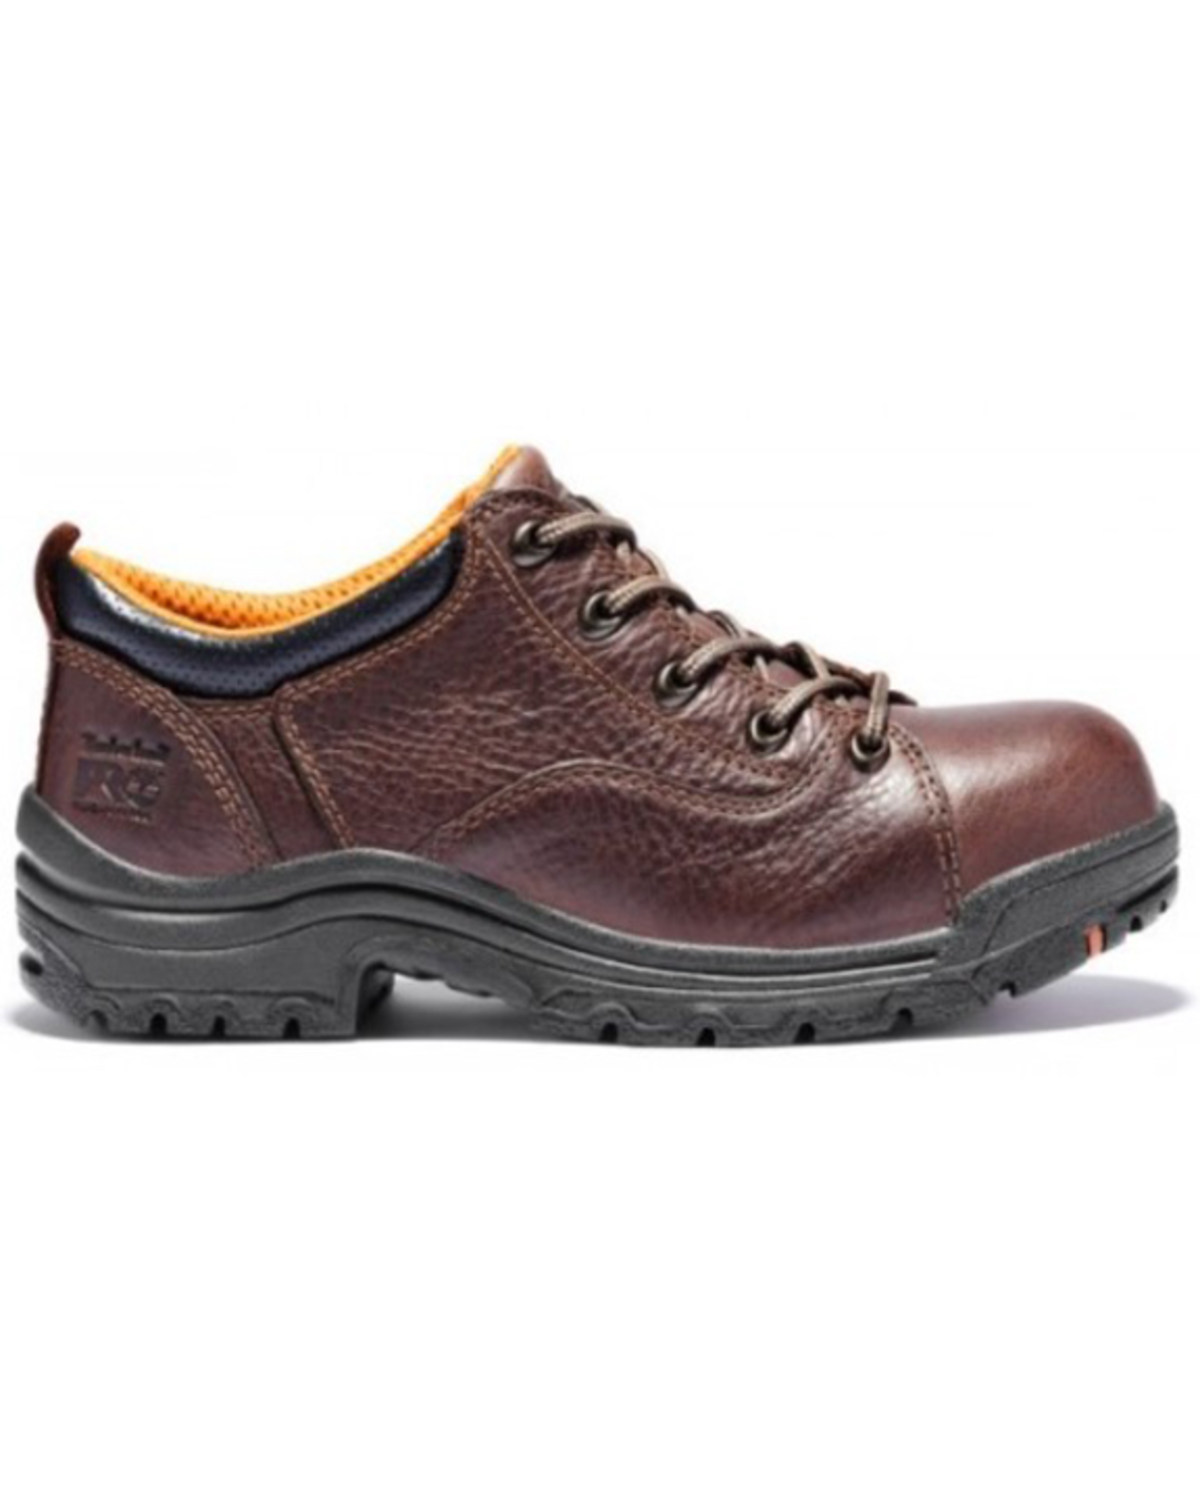 Timberland Women's TiTAN Oxford EH Work Shoes - Alloy Toe